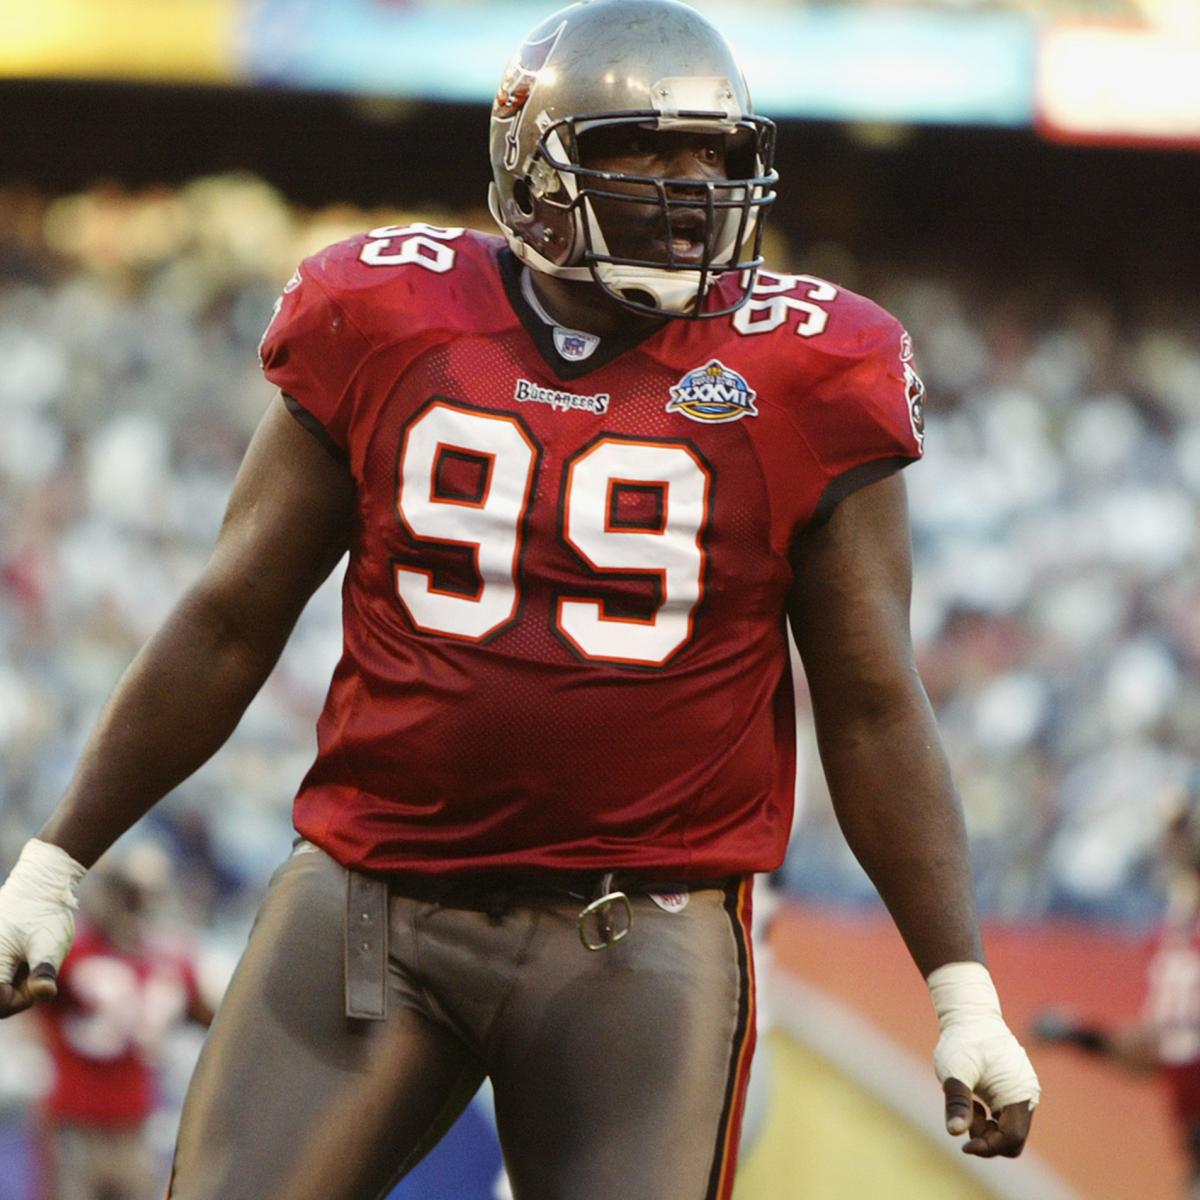 Warren Sapp Was the Beginning of a New Era for a Generation of